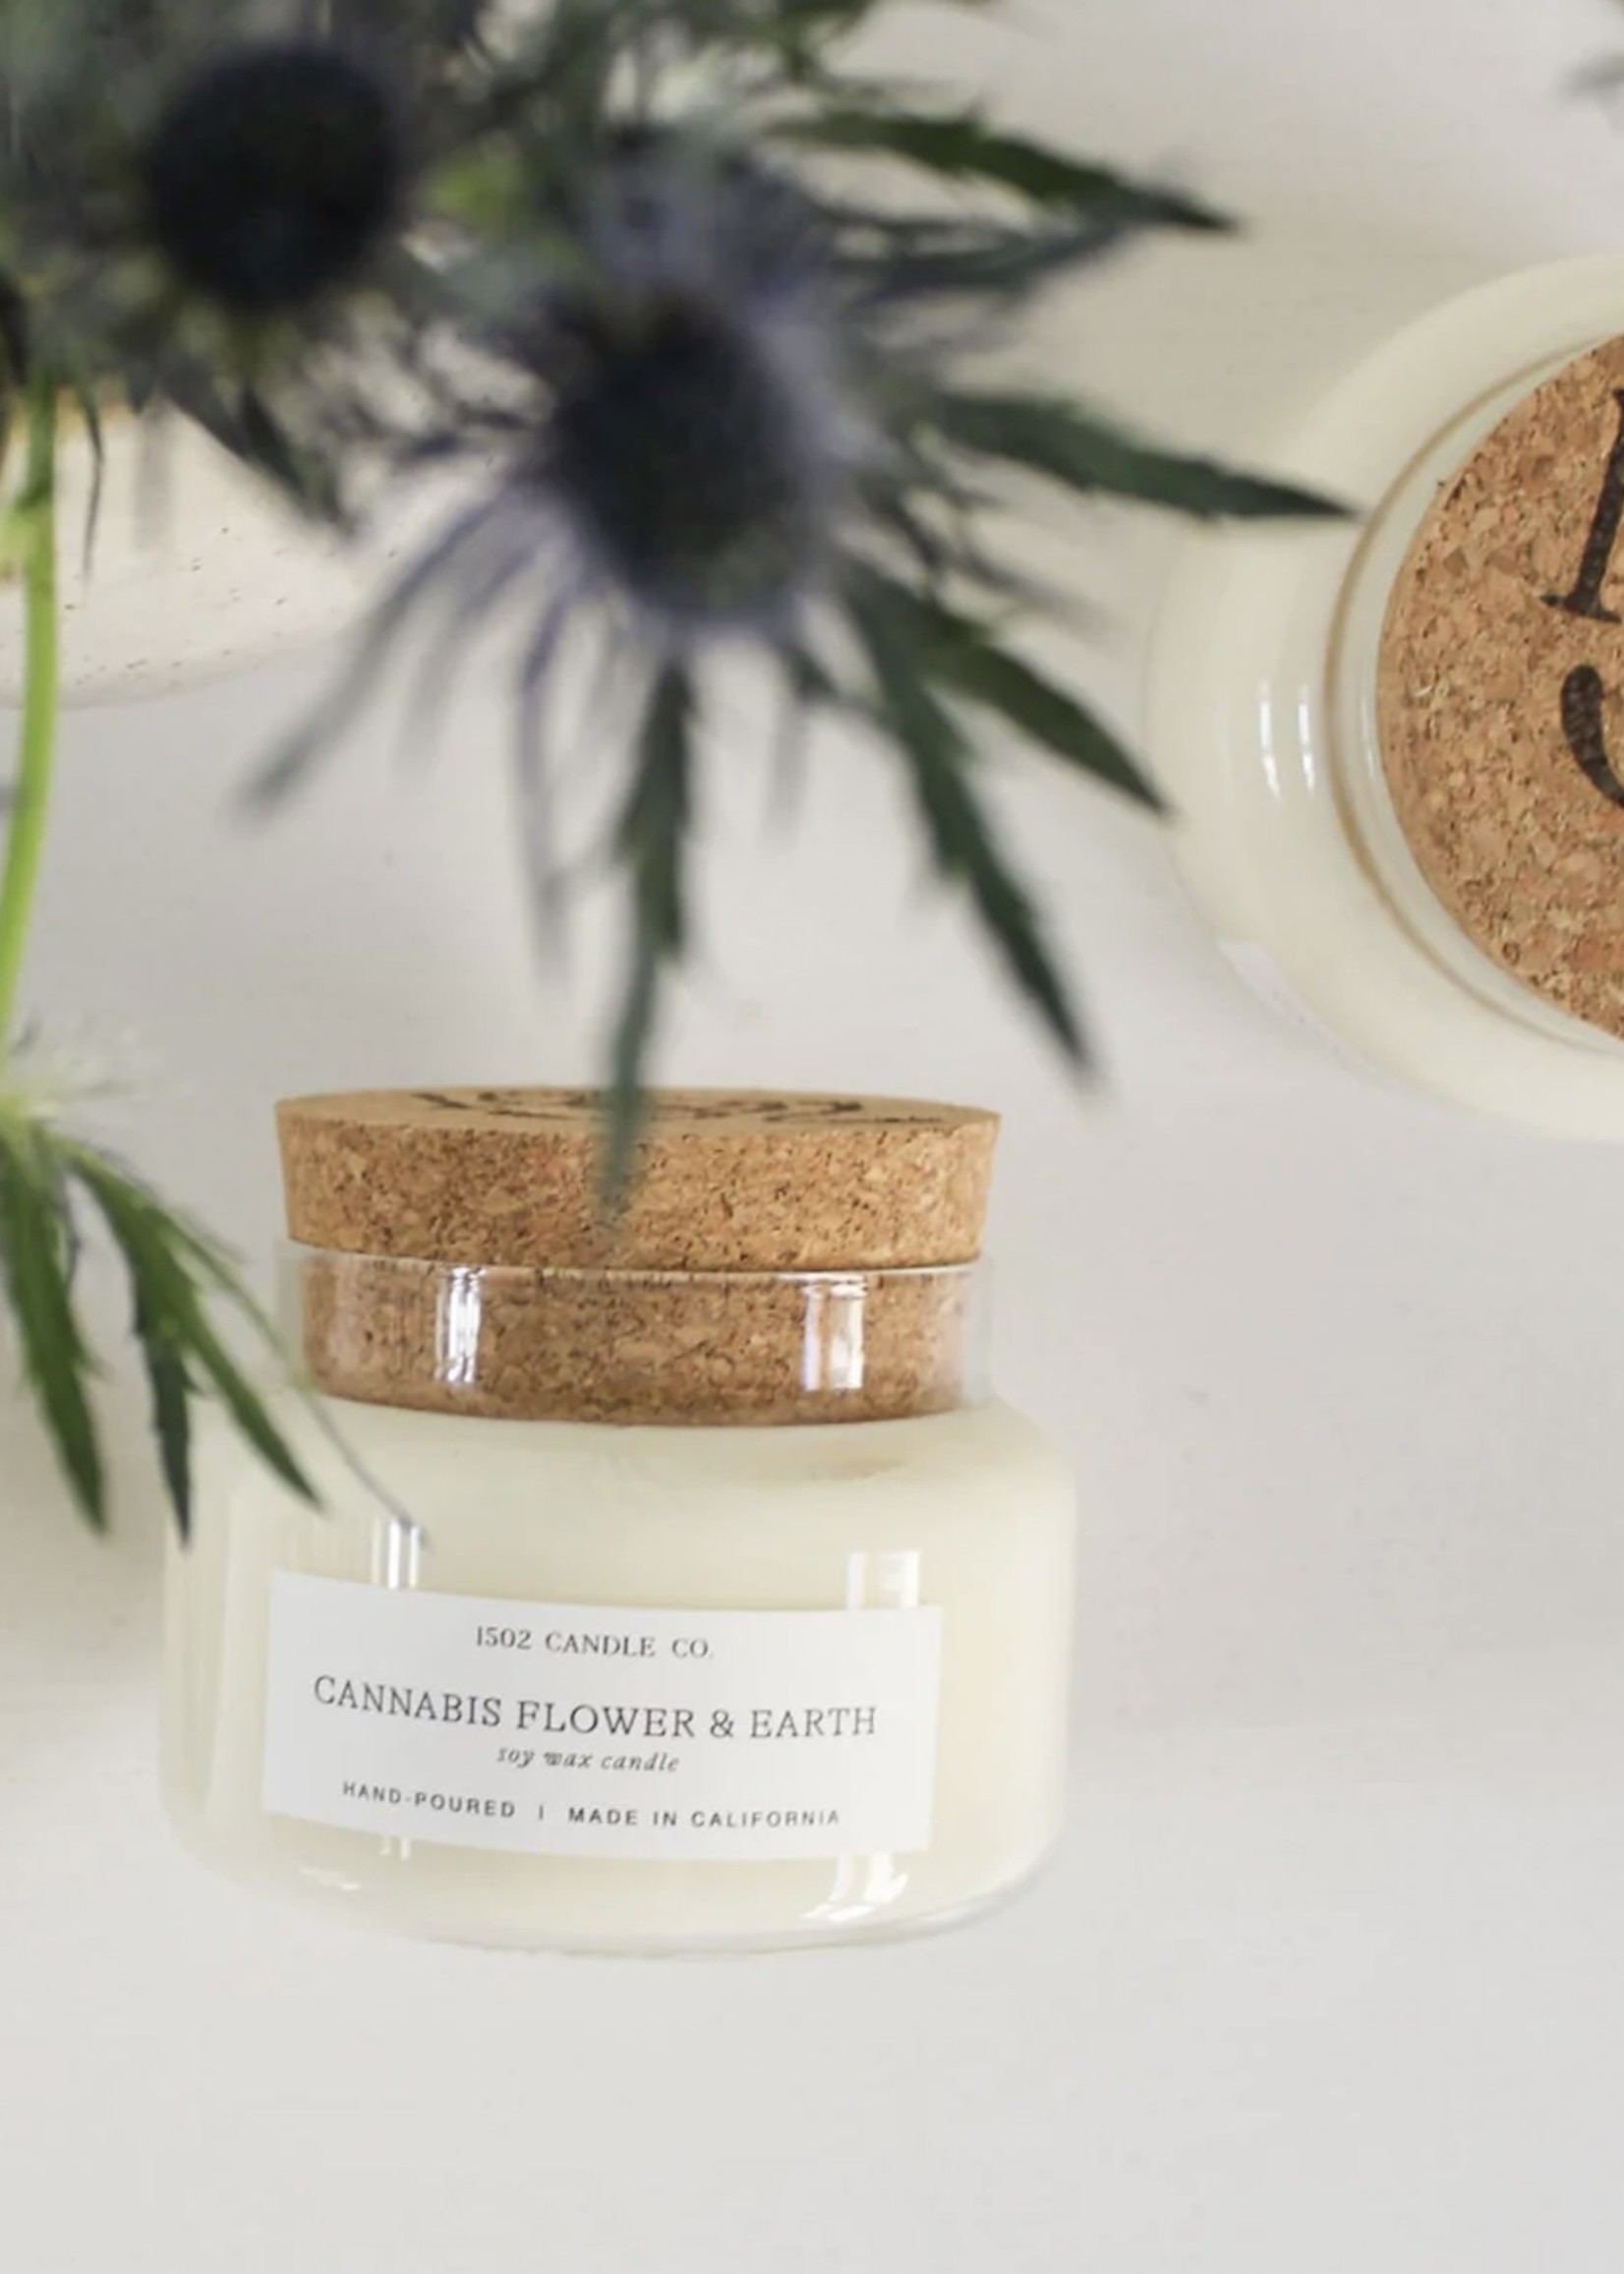 1502 Candle Co. 1502 Cannabis Flower and Earth Jar Candle